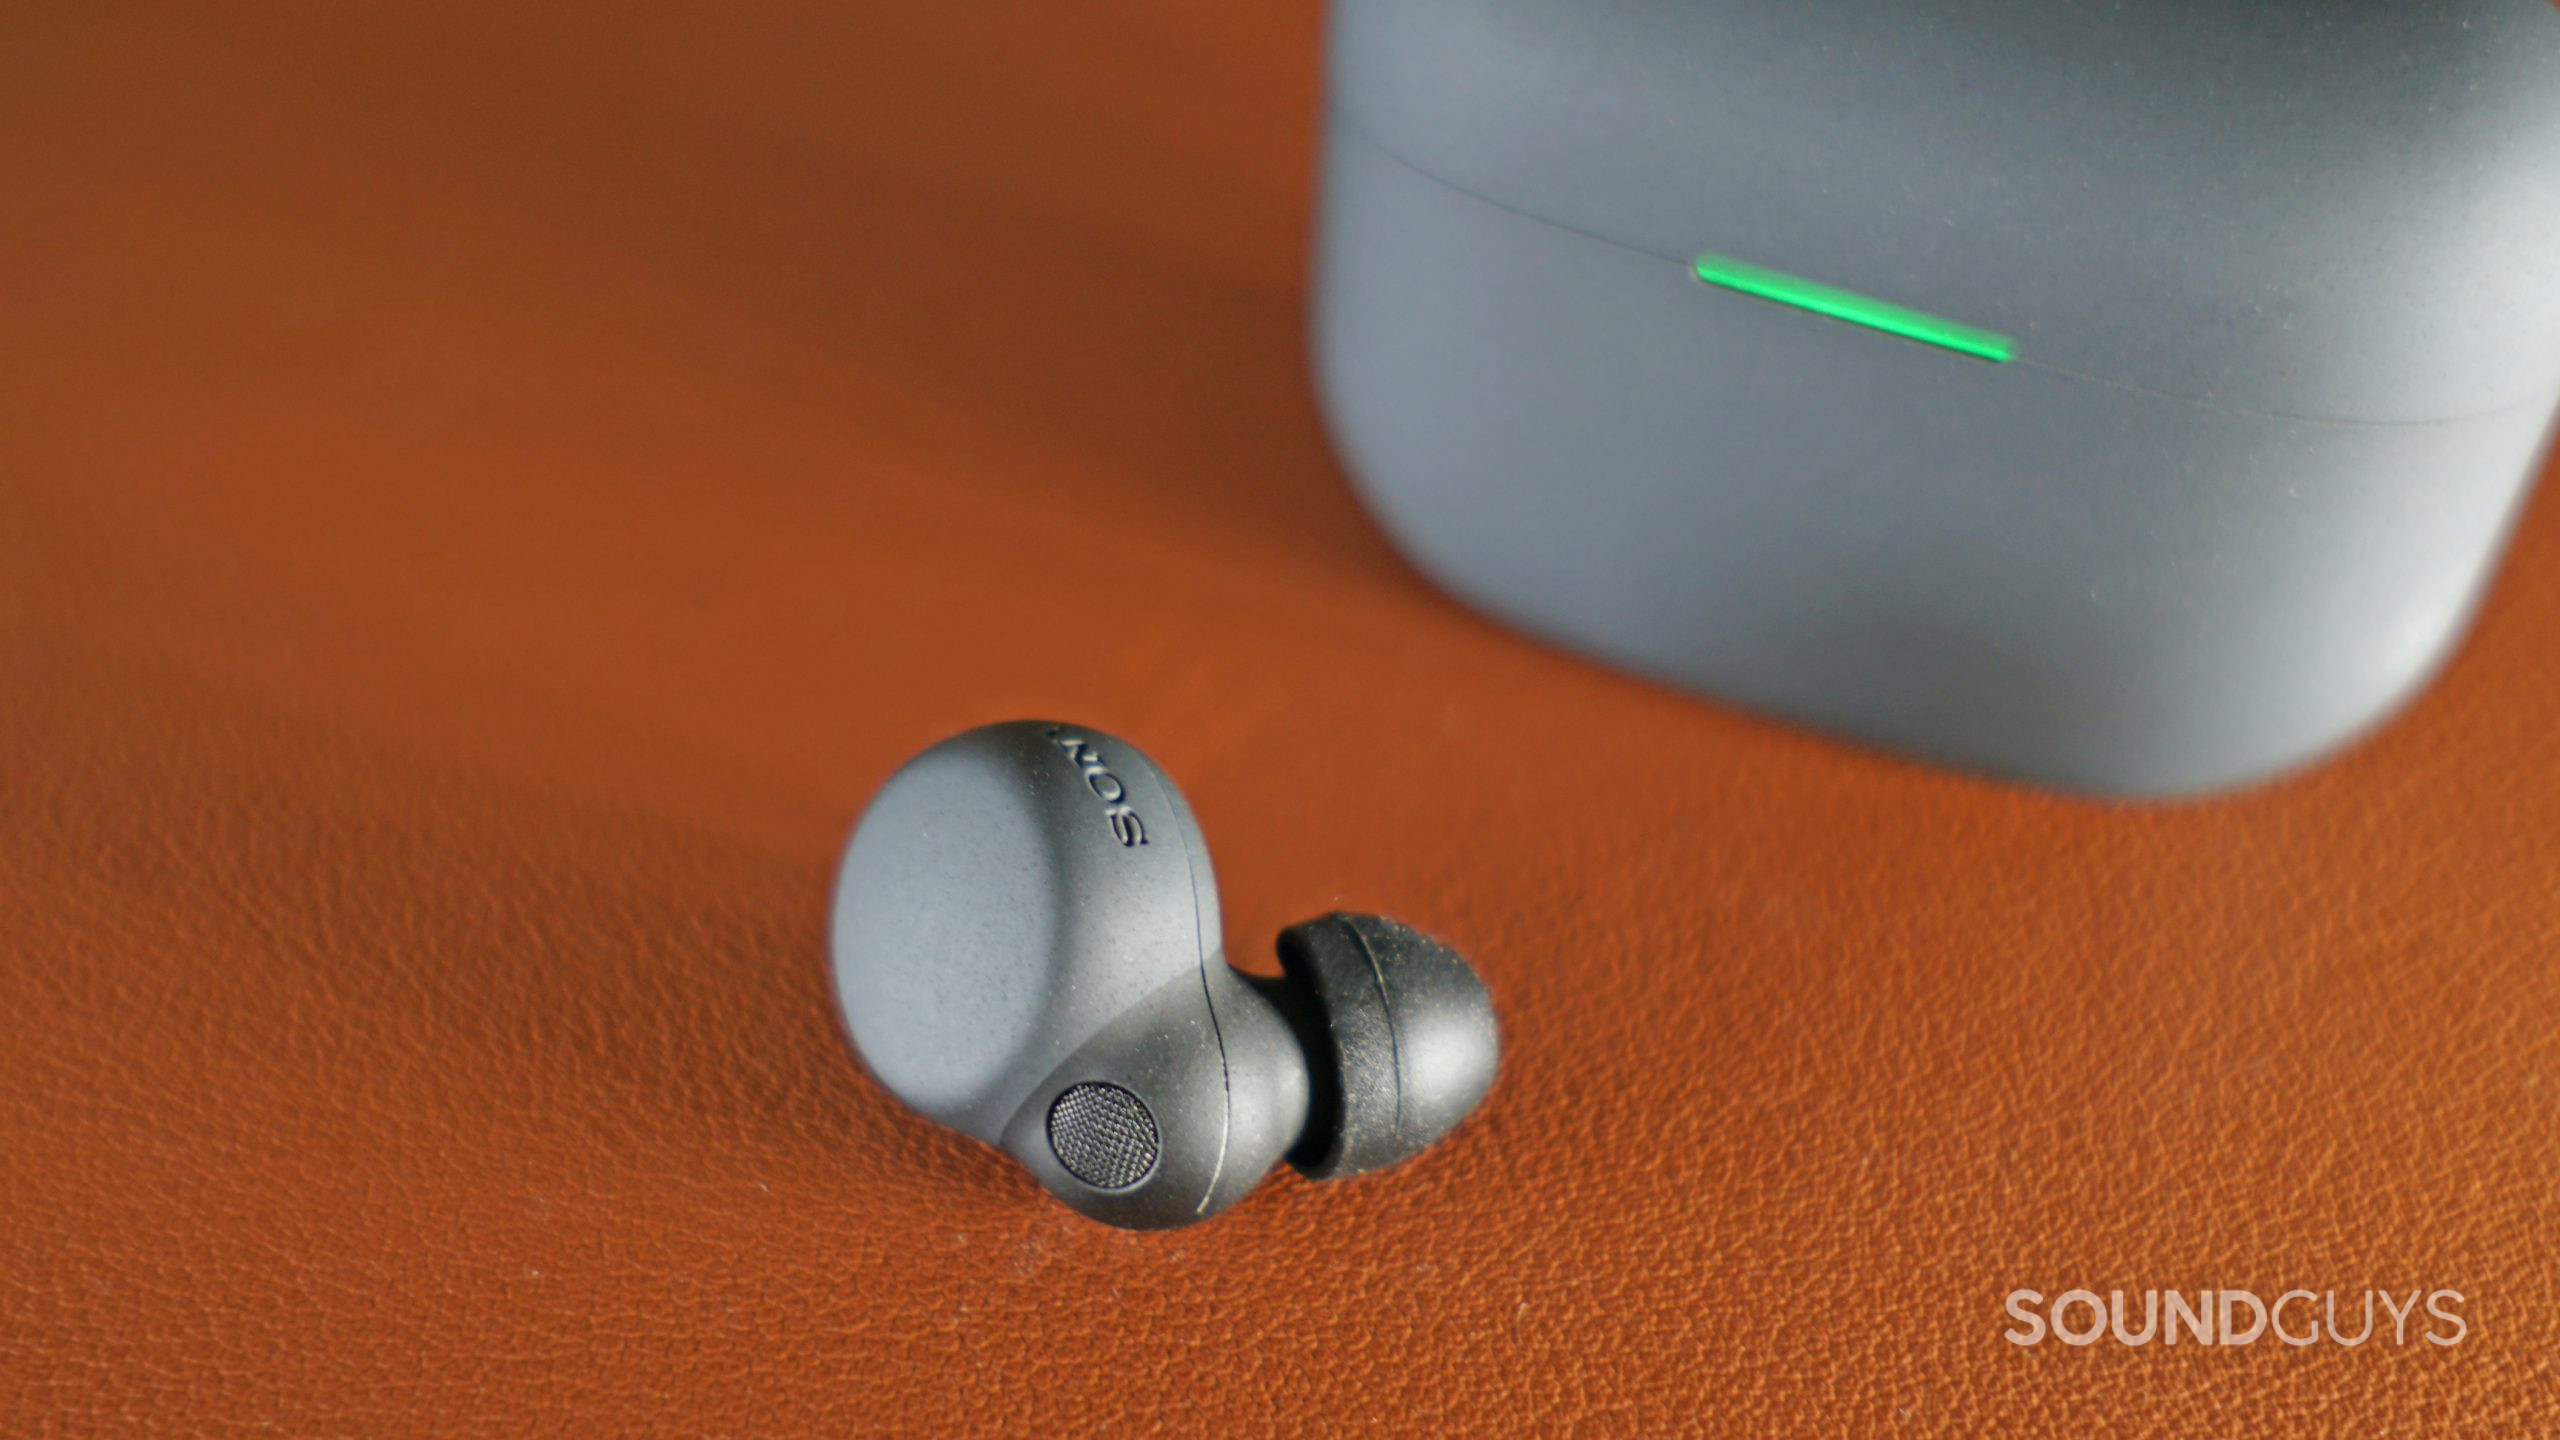 The Sonly LinkBuds S earbud lays on a leather surface in front of its charging case.